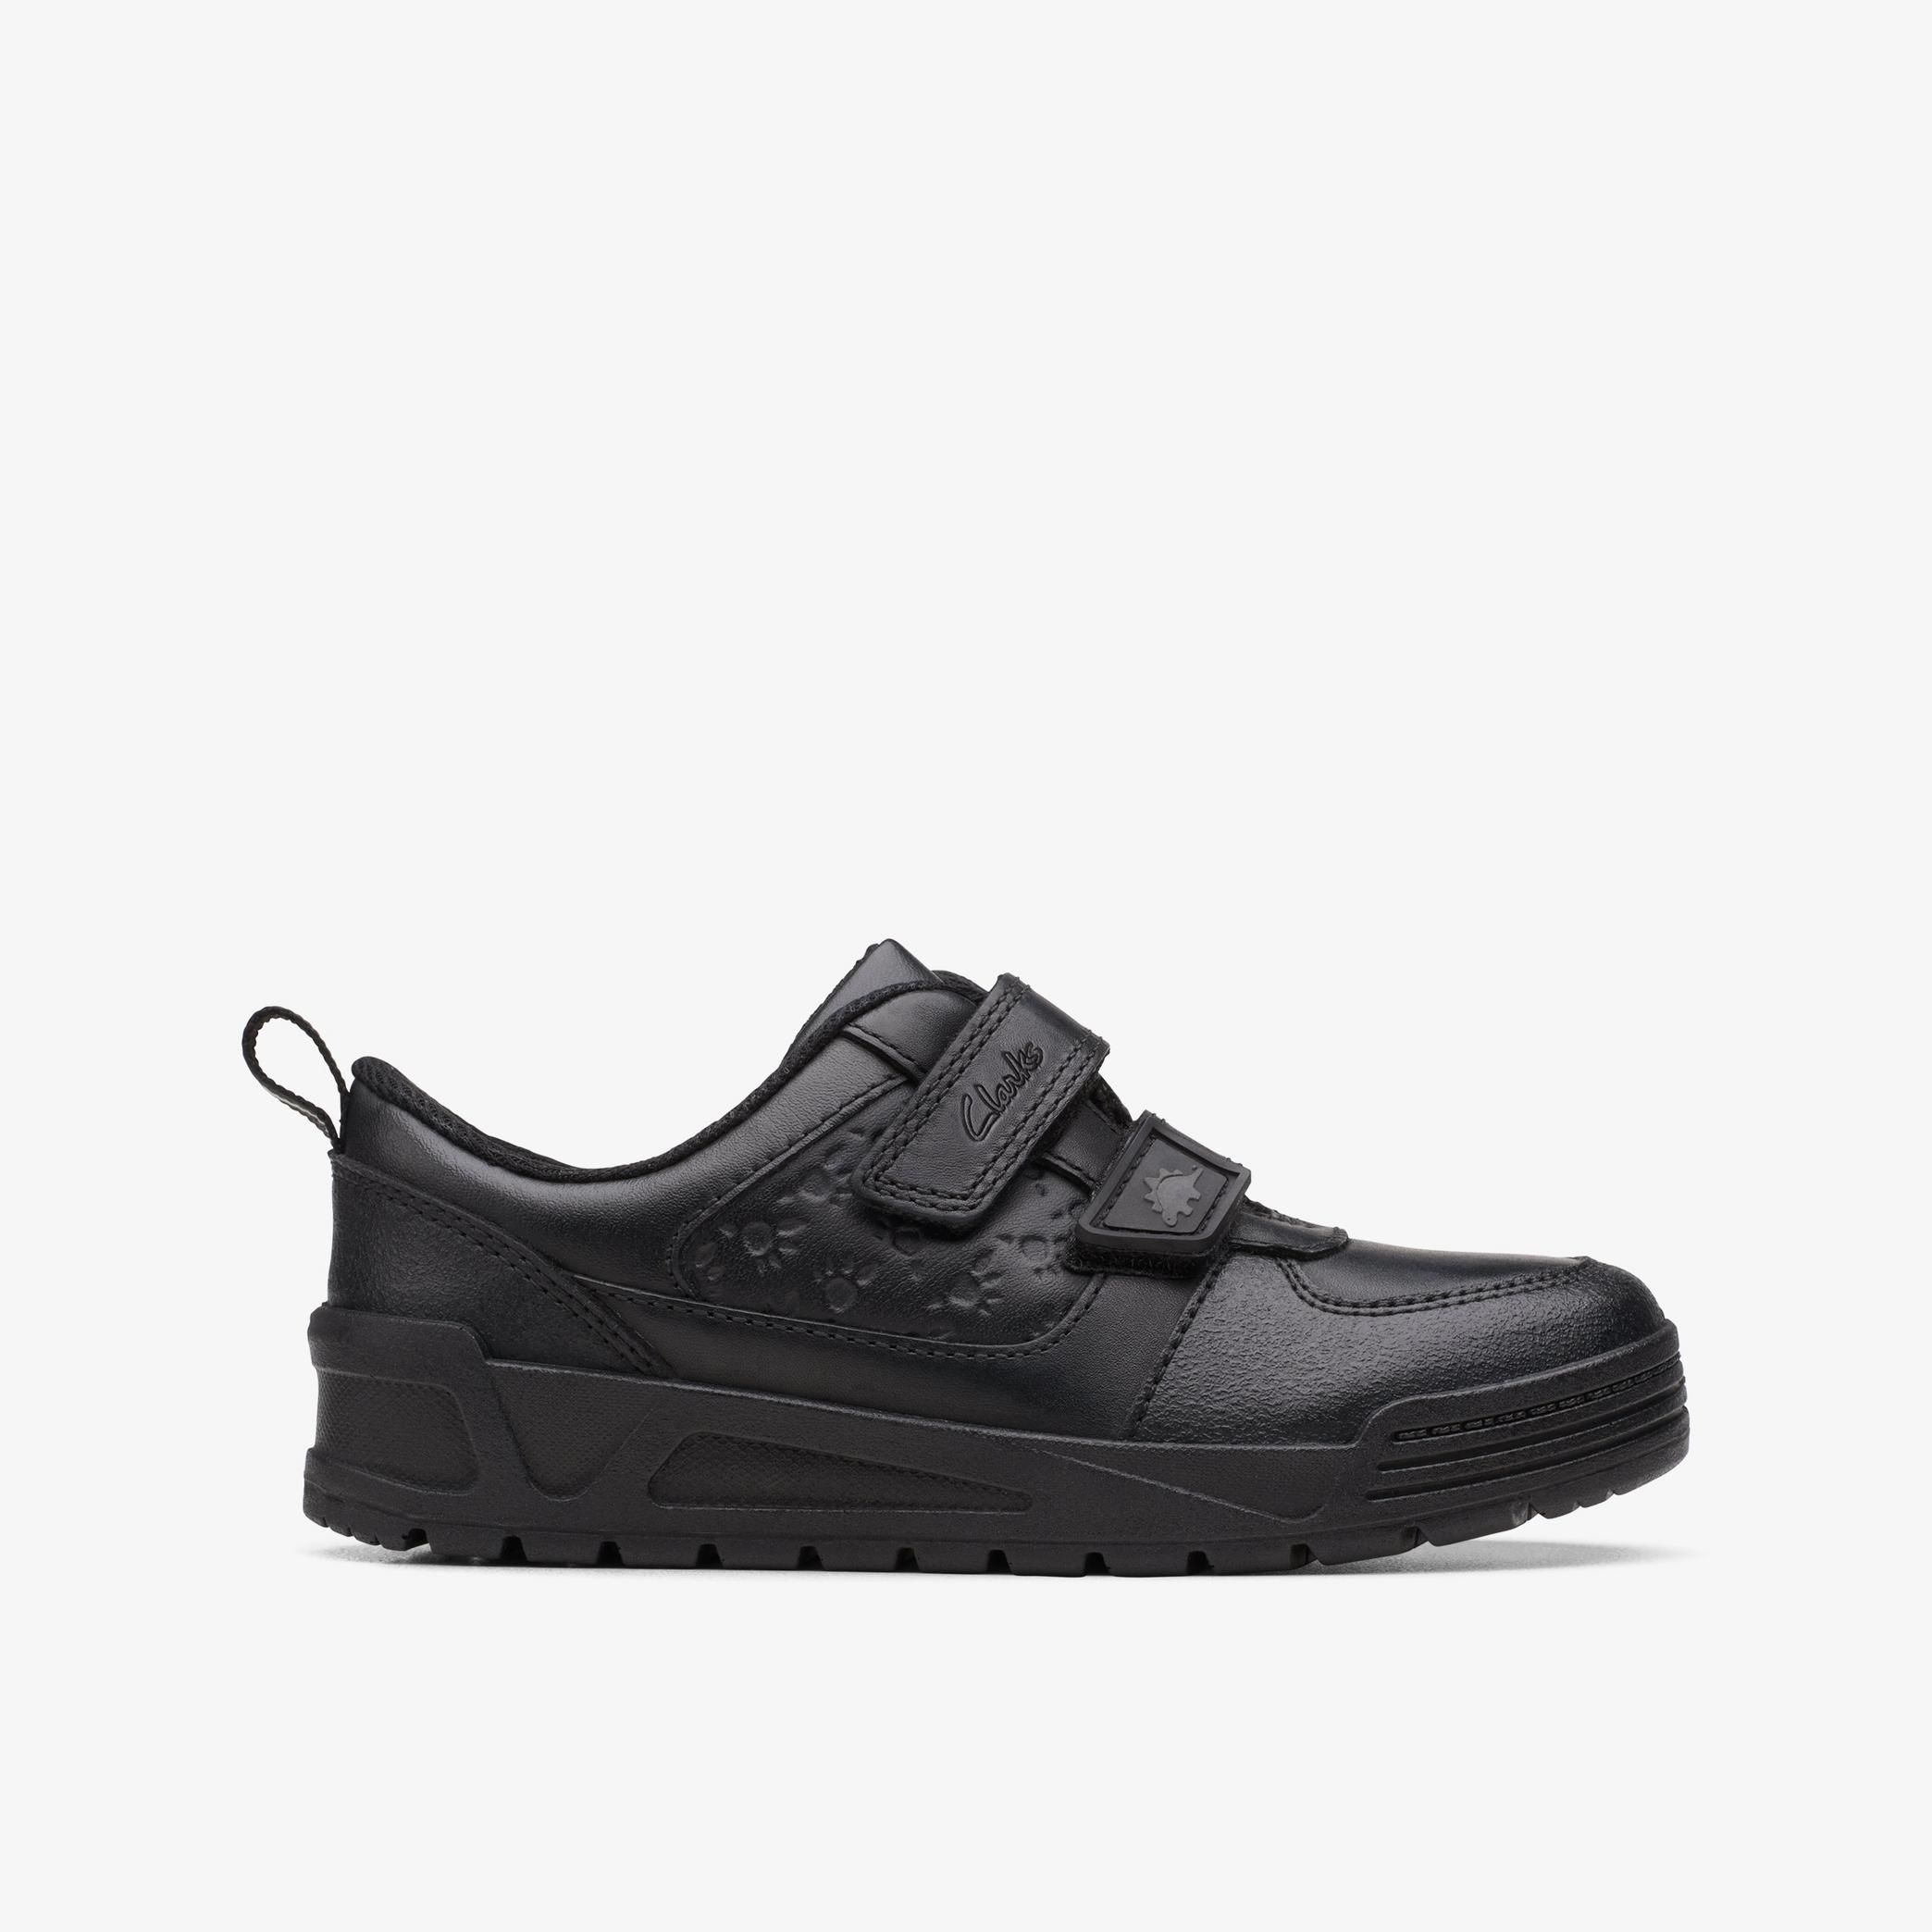 Palmer Steggy Kid Black Leather Shoes, view 1 of 6